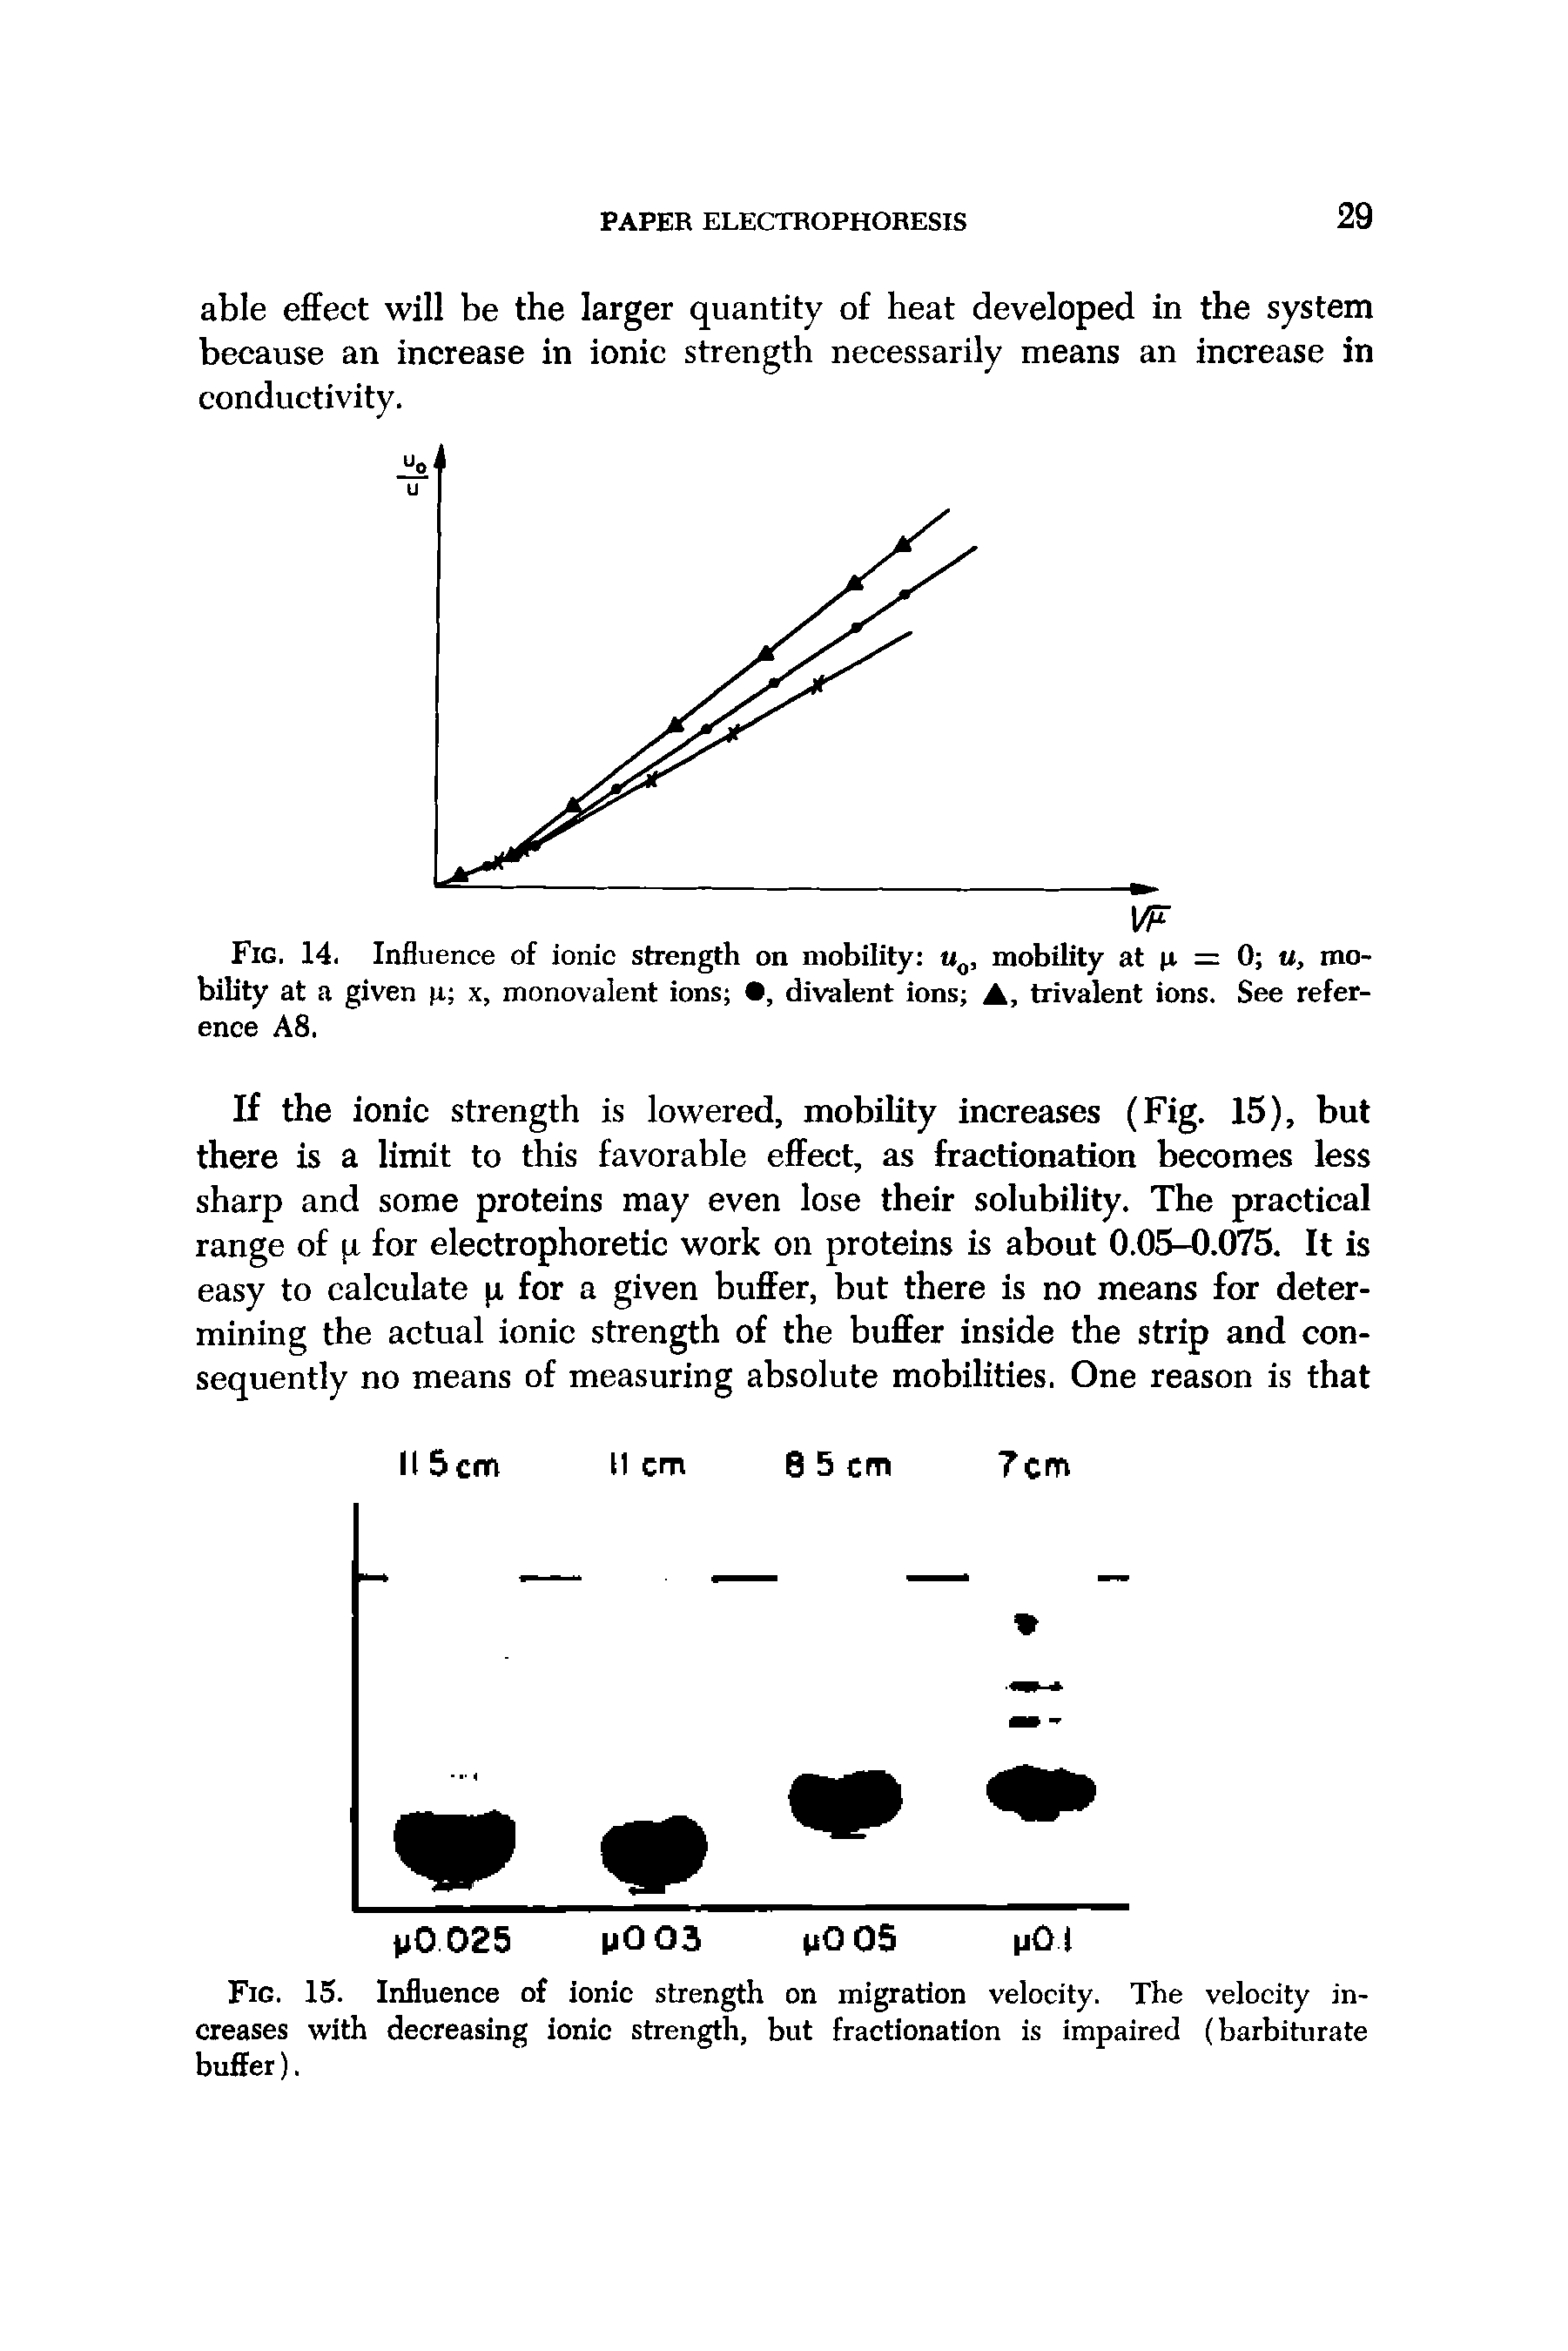 Fig. 15. Influence of ionic strength on migration velocity. The velocity increases with decreasing ionic strength, but fractionation is impaired (barbiturate buffer).